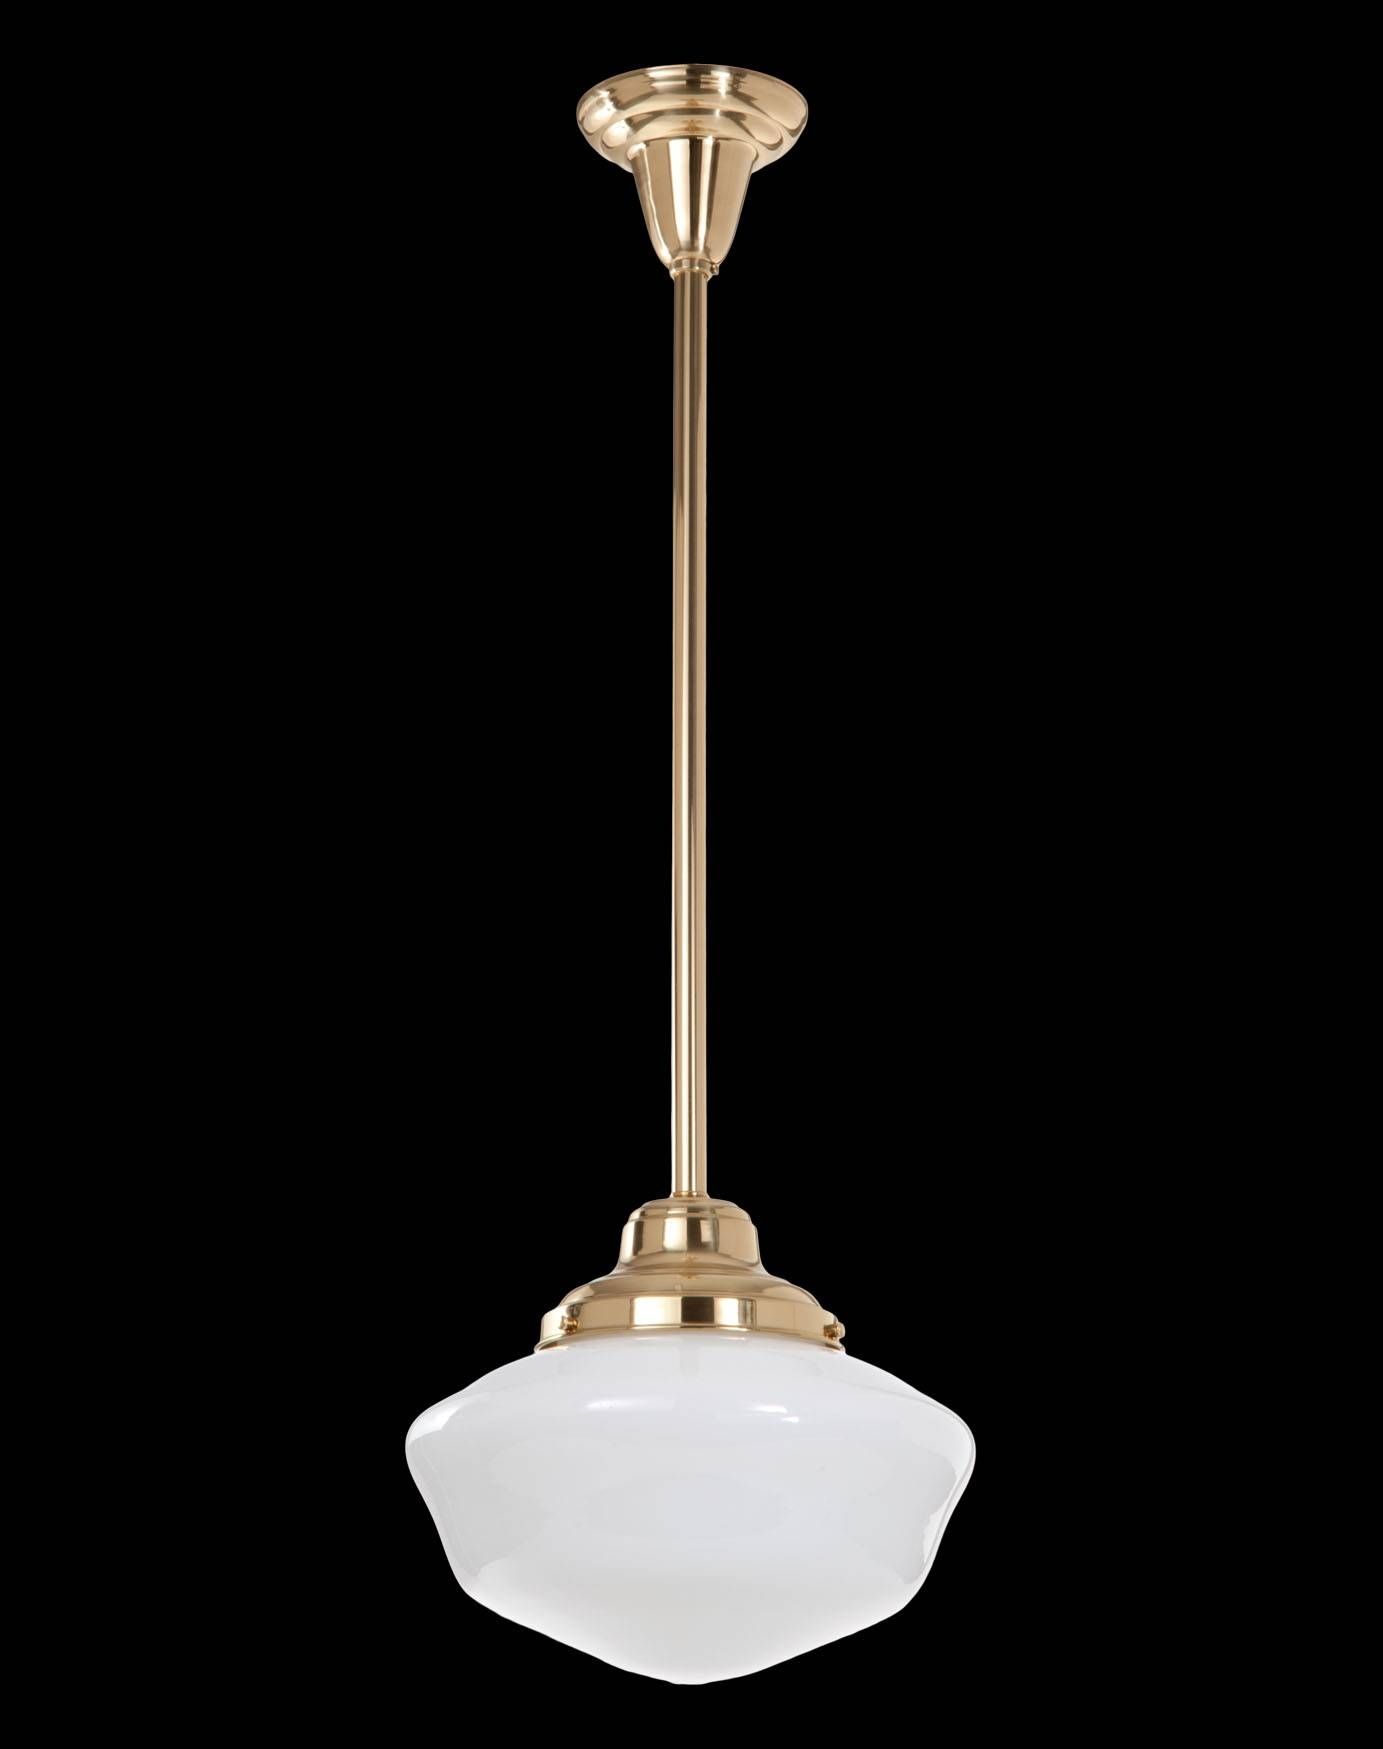 Inspirational Victorian Pendant Lighting 61 For Your Ceiling Fans Throughout Victorian Pendant Lighting (Photo 4 of 15)